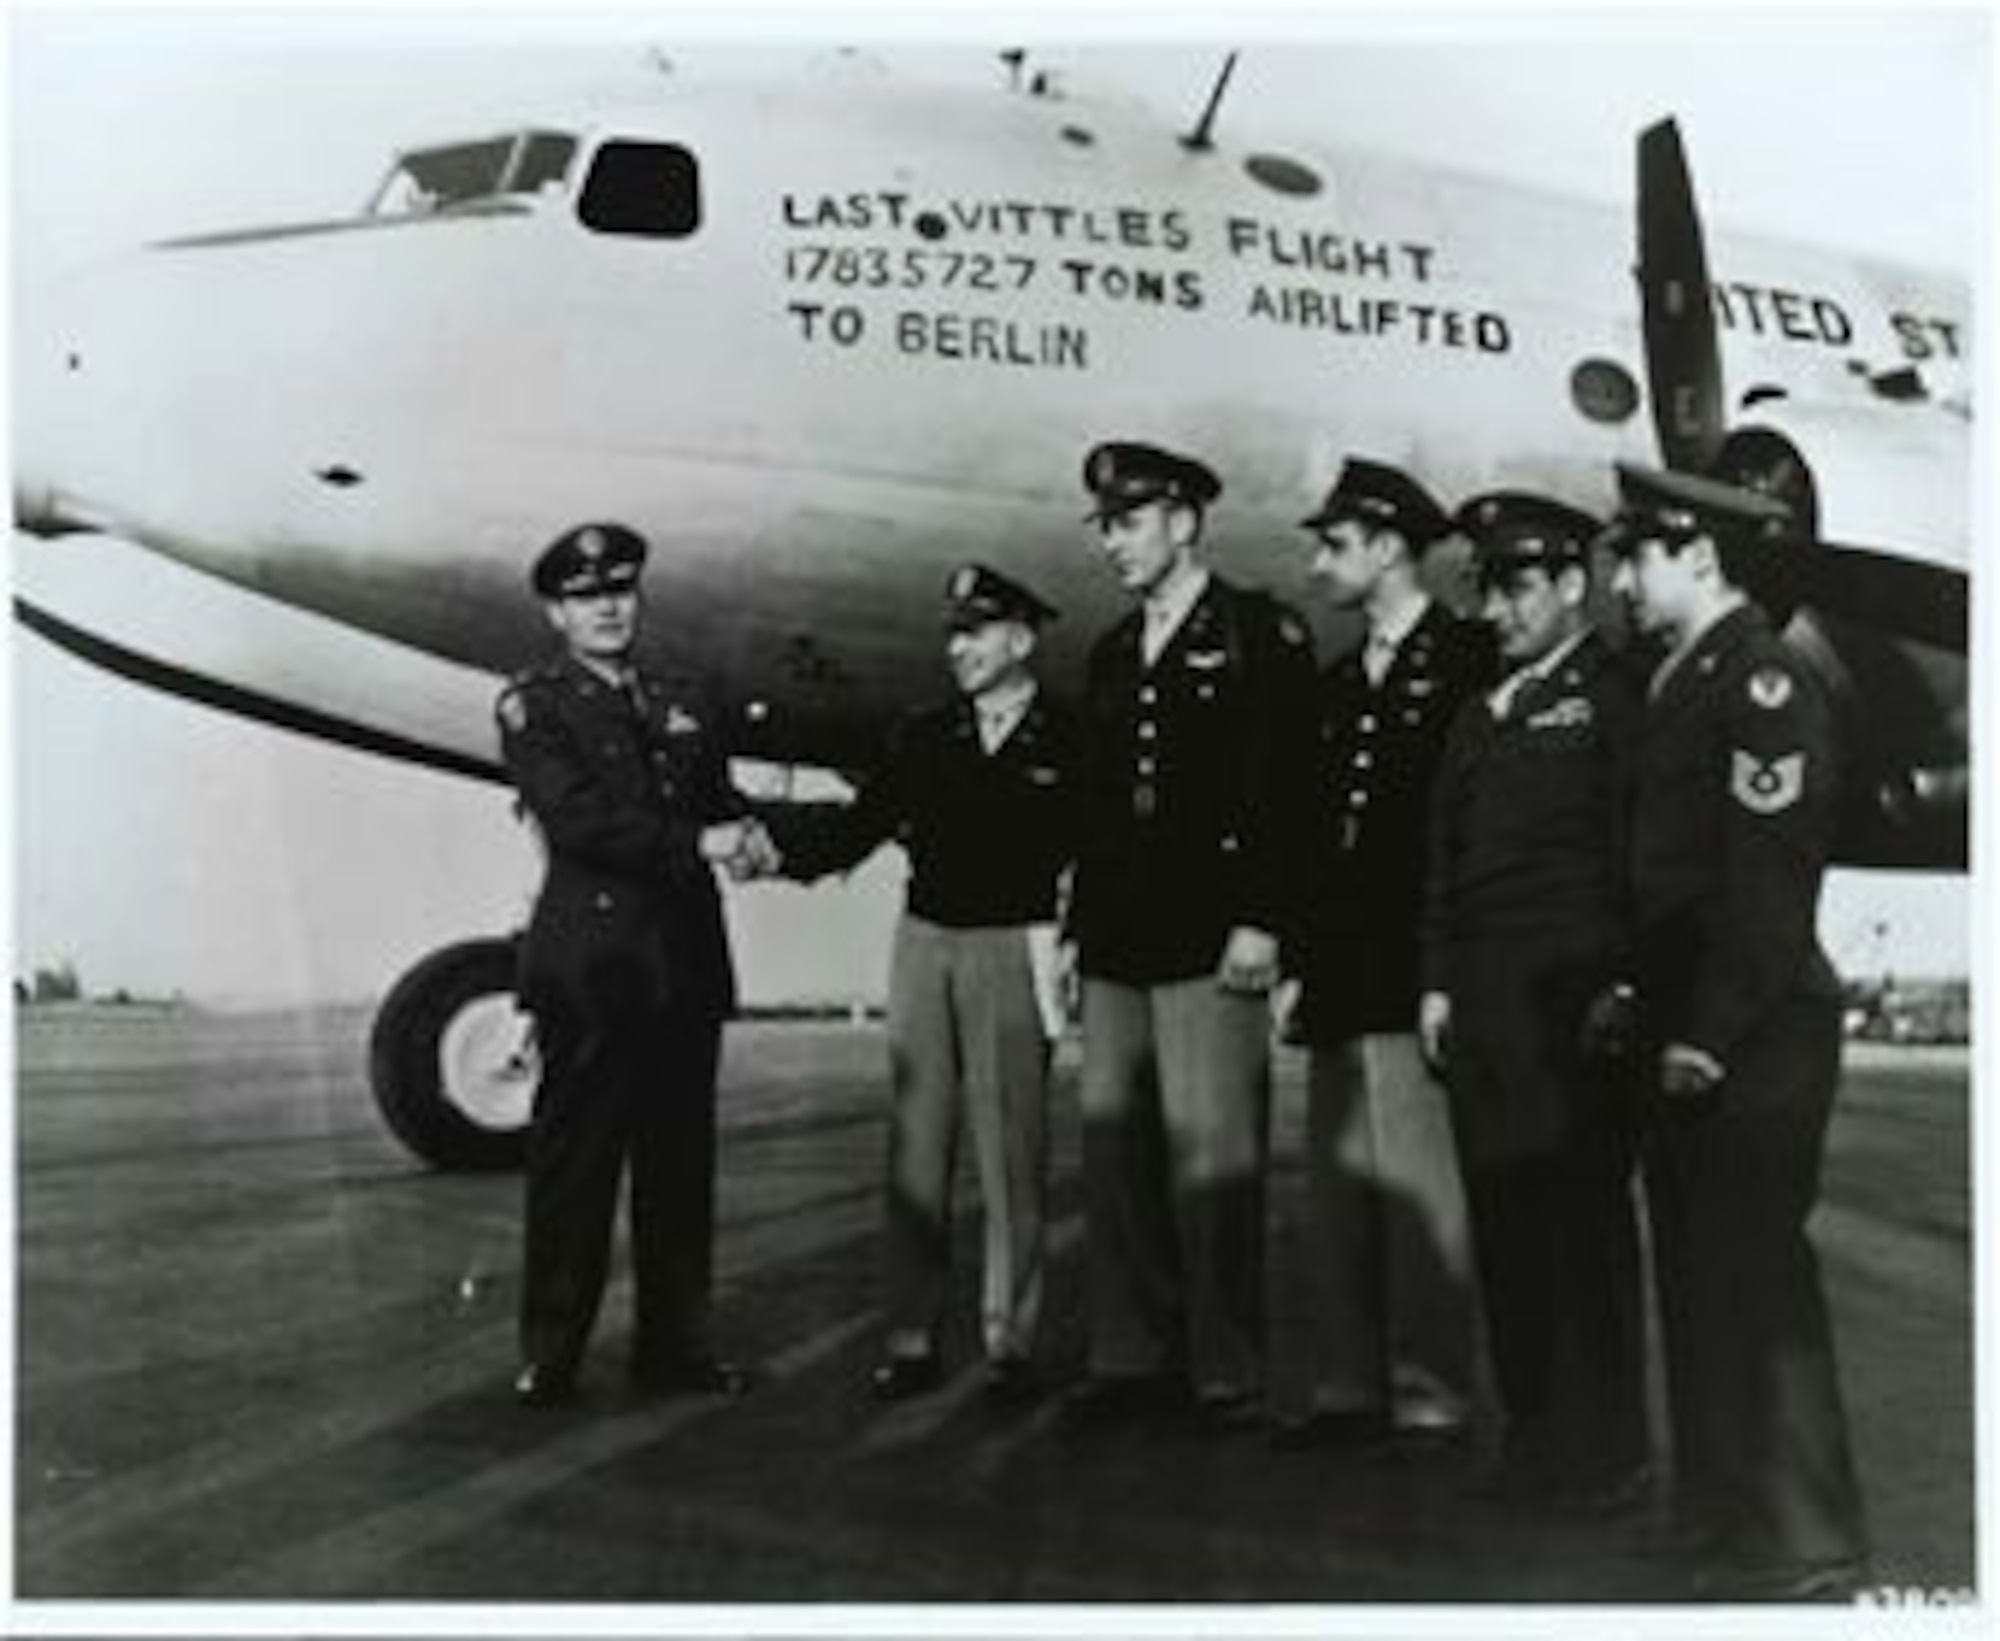 The last official flight of the Berlin Airlift in 1949. (Courtesy photo)